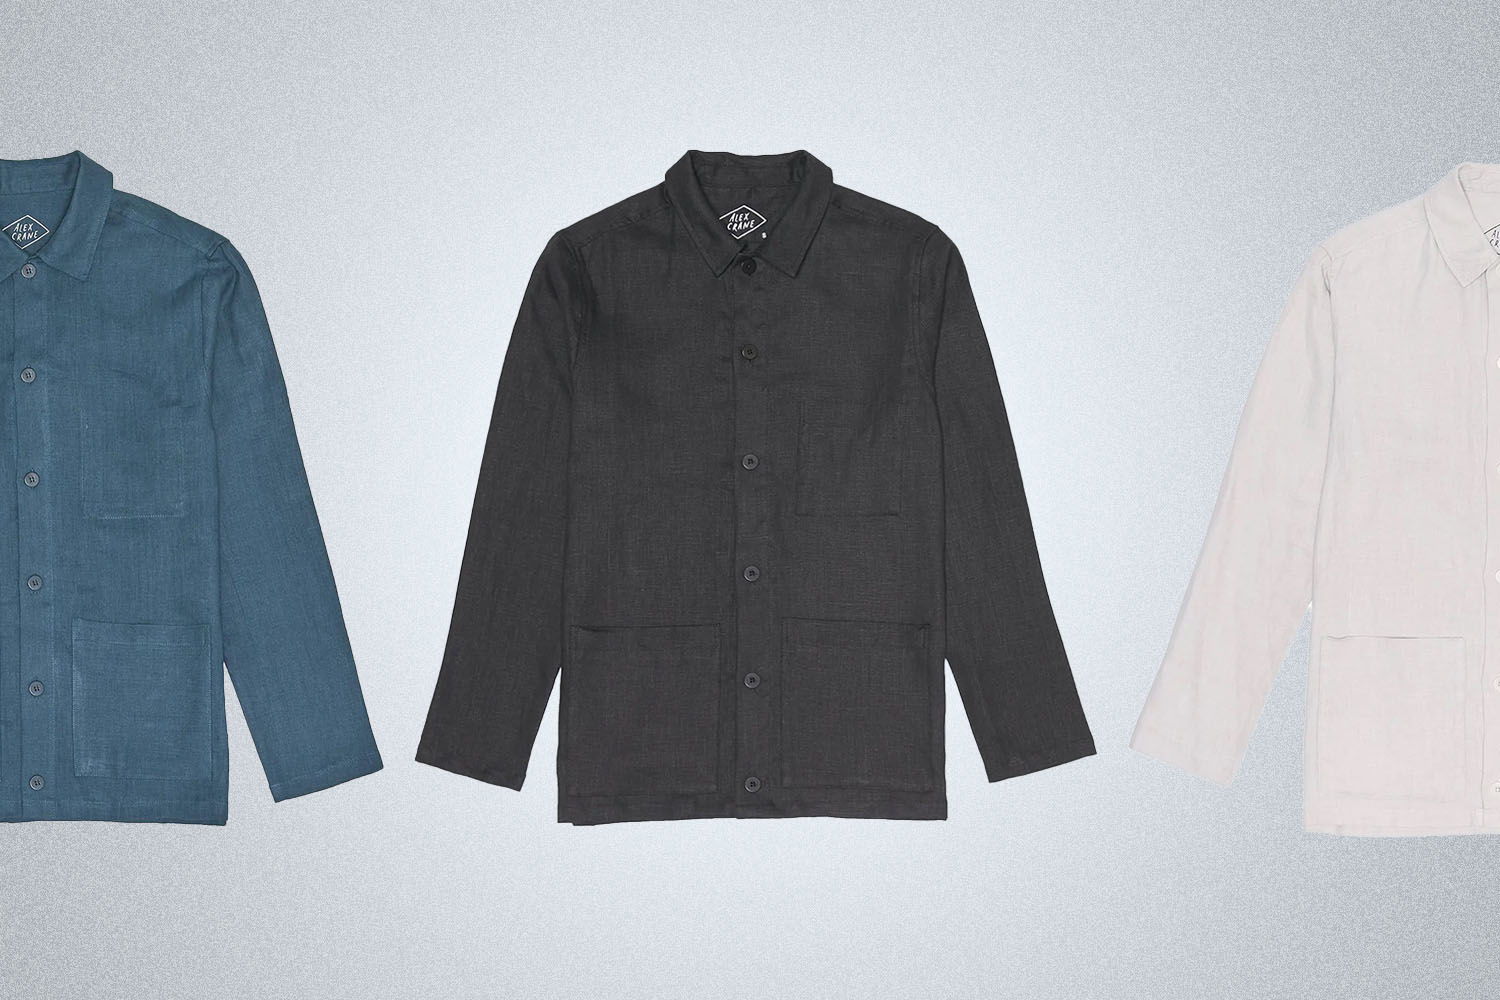 three diffrent colors of the Alex Crane Kite Jacket on a grey background